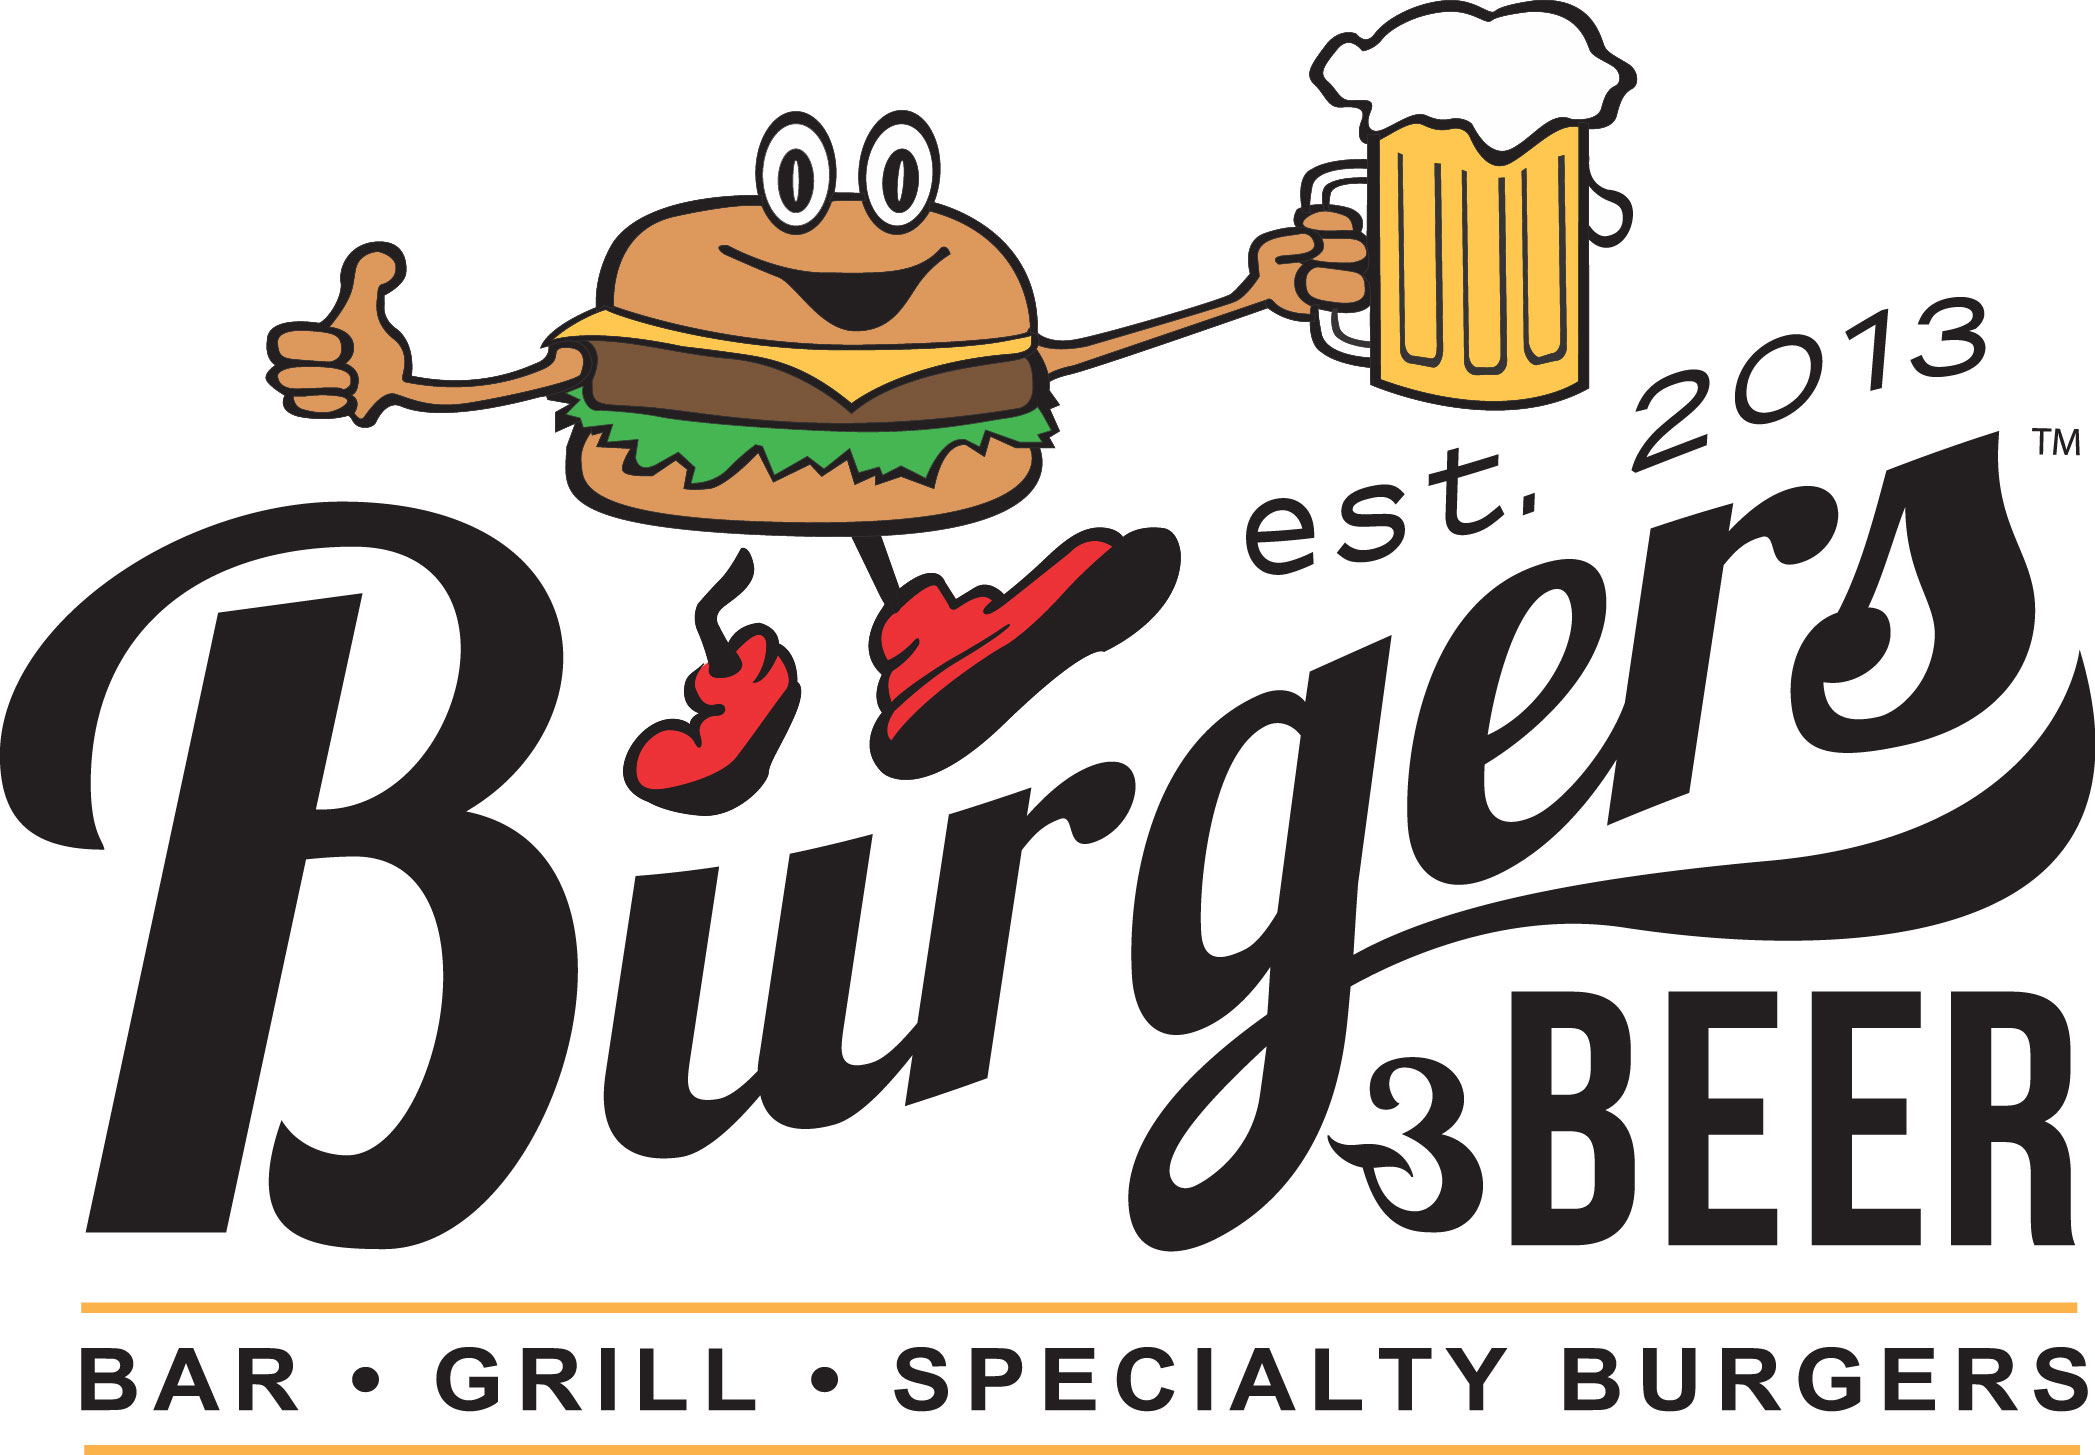 burger and beer clipart